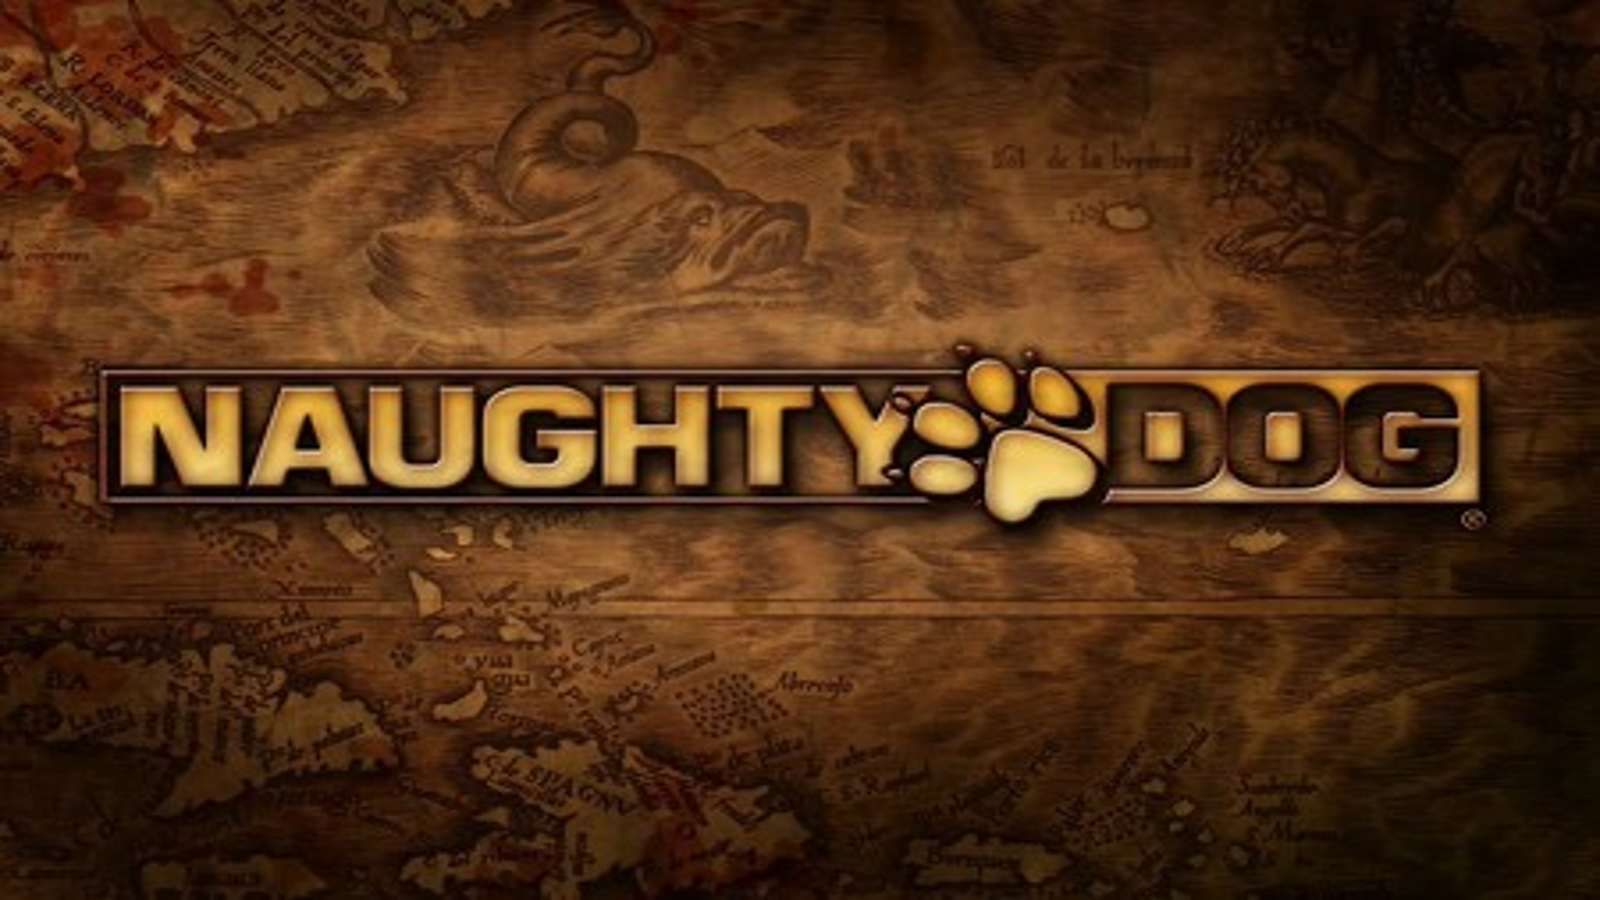 The Rise of Naughty Dog - Part 2